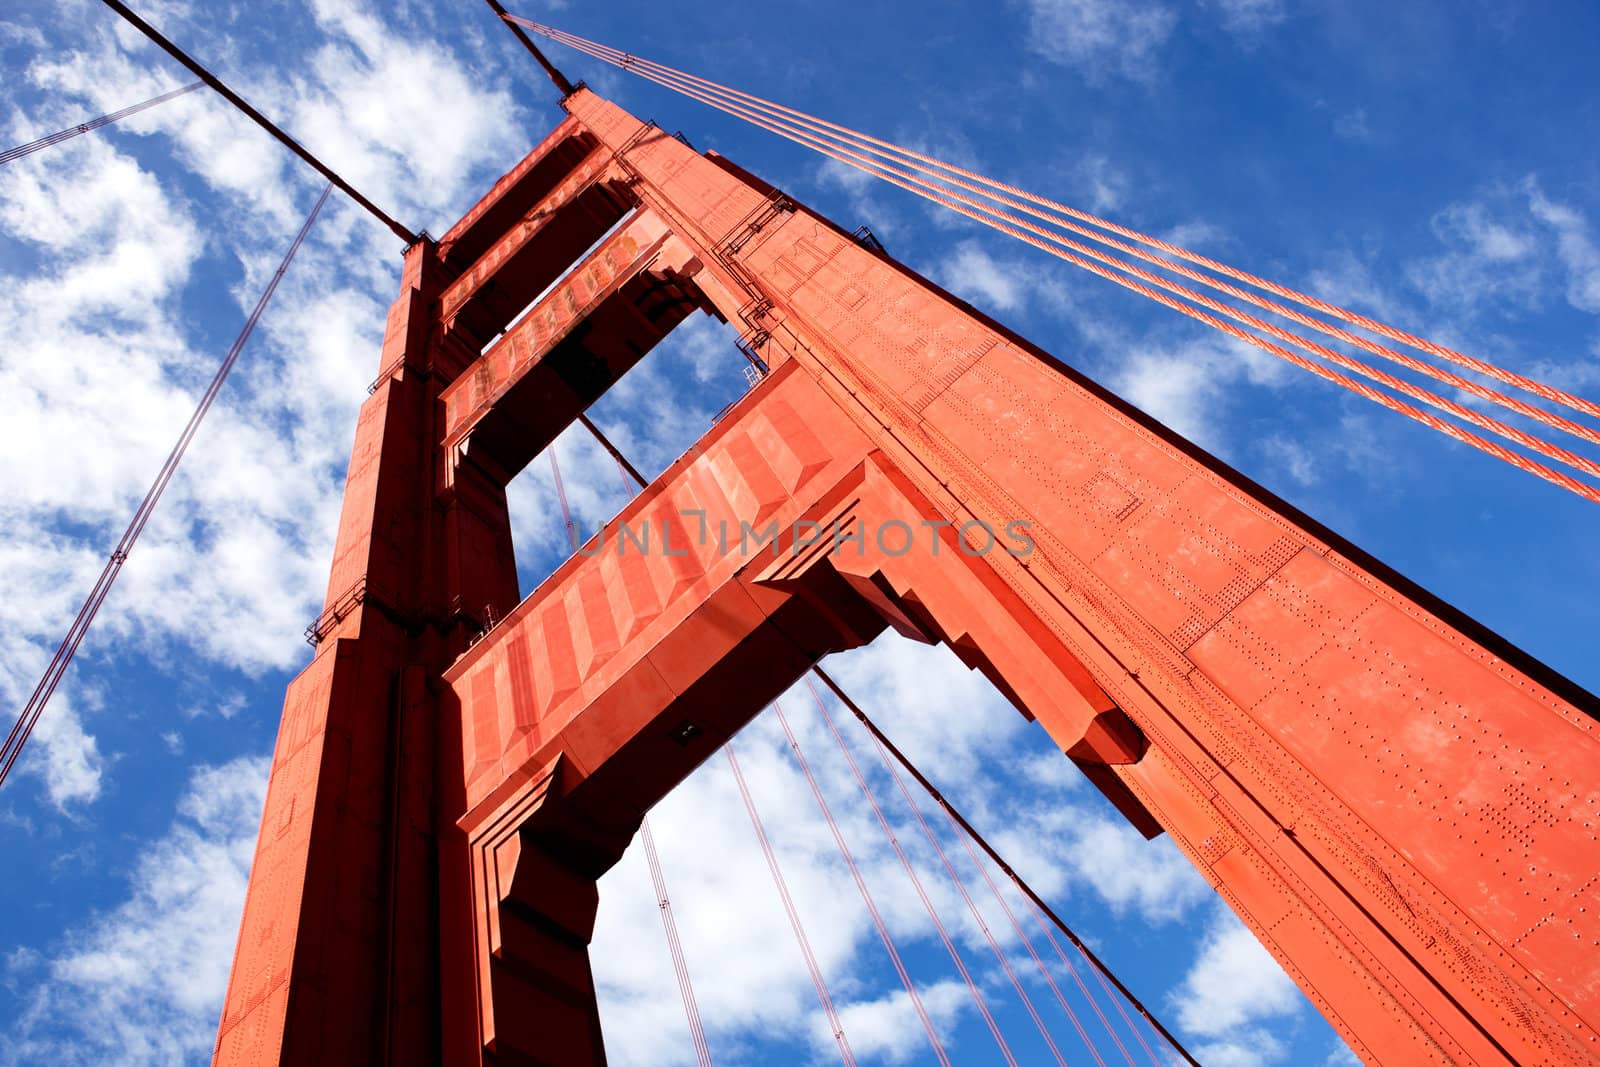 A detail of one of the Golden Gate Bridge towers.